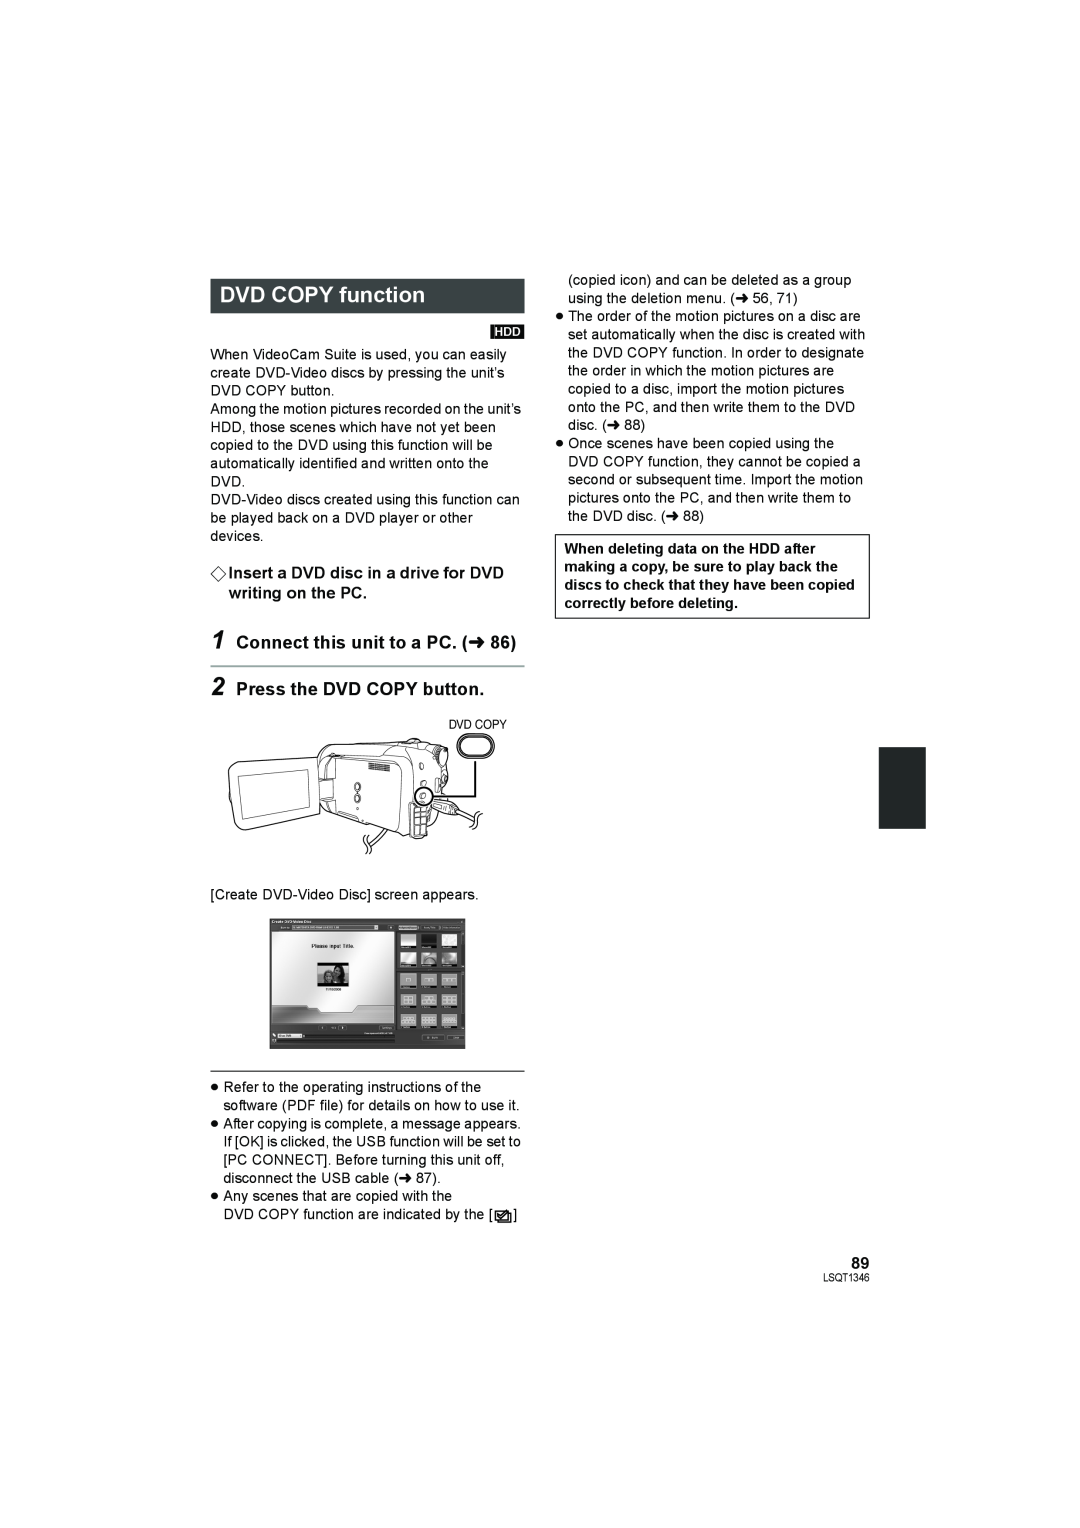 Panasonic SDR-H50 operating instructions Connect this unit to a PC. l86 2 Press the DVD COPY button, DVD COPY function 